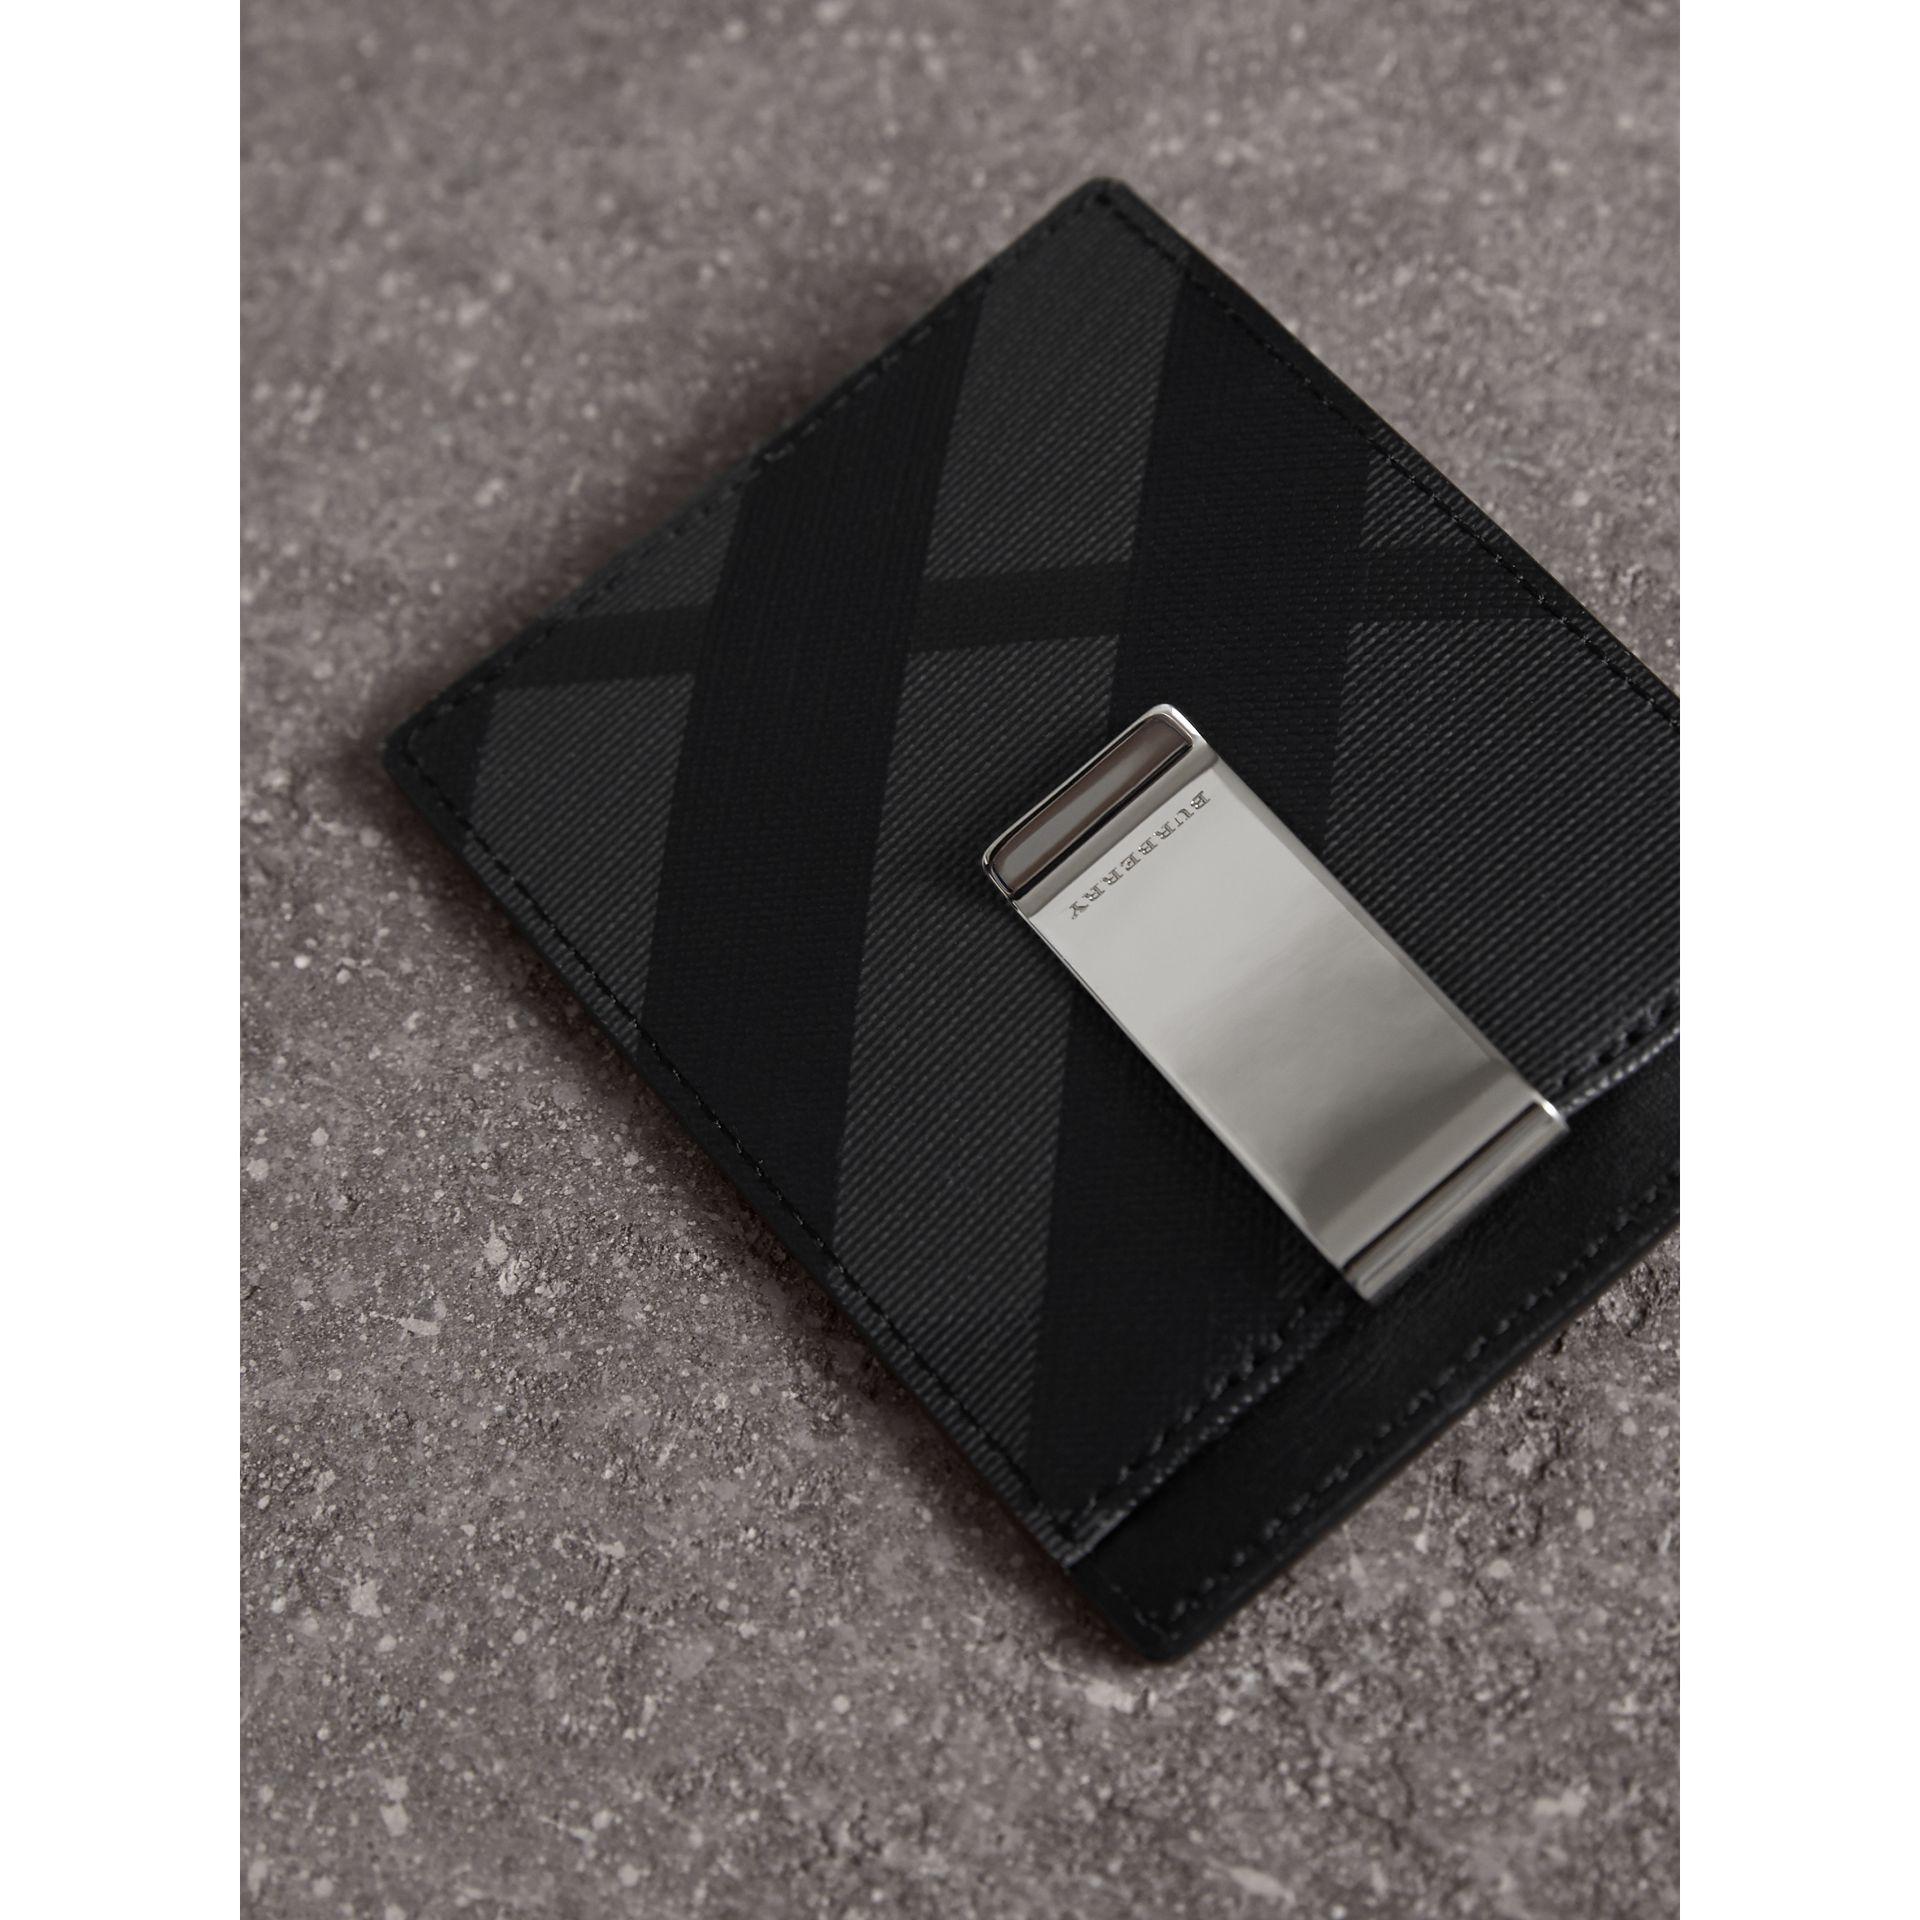 Burberry Logo Embossed Grainy Leather Money Clip Card Case in Charcoal Grey  - Men, Burberry® Official